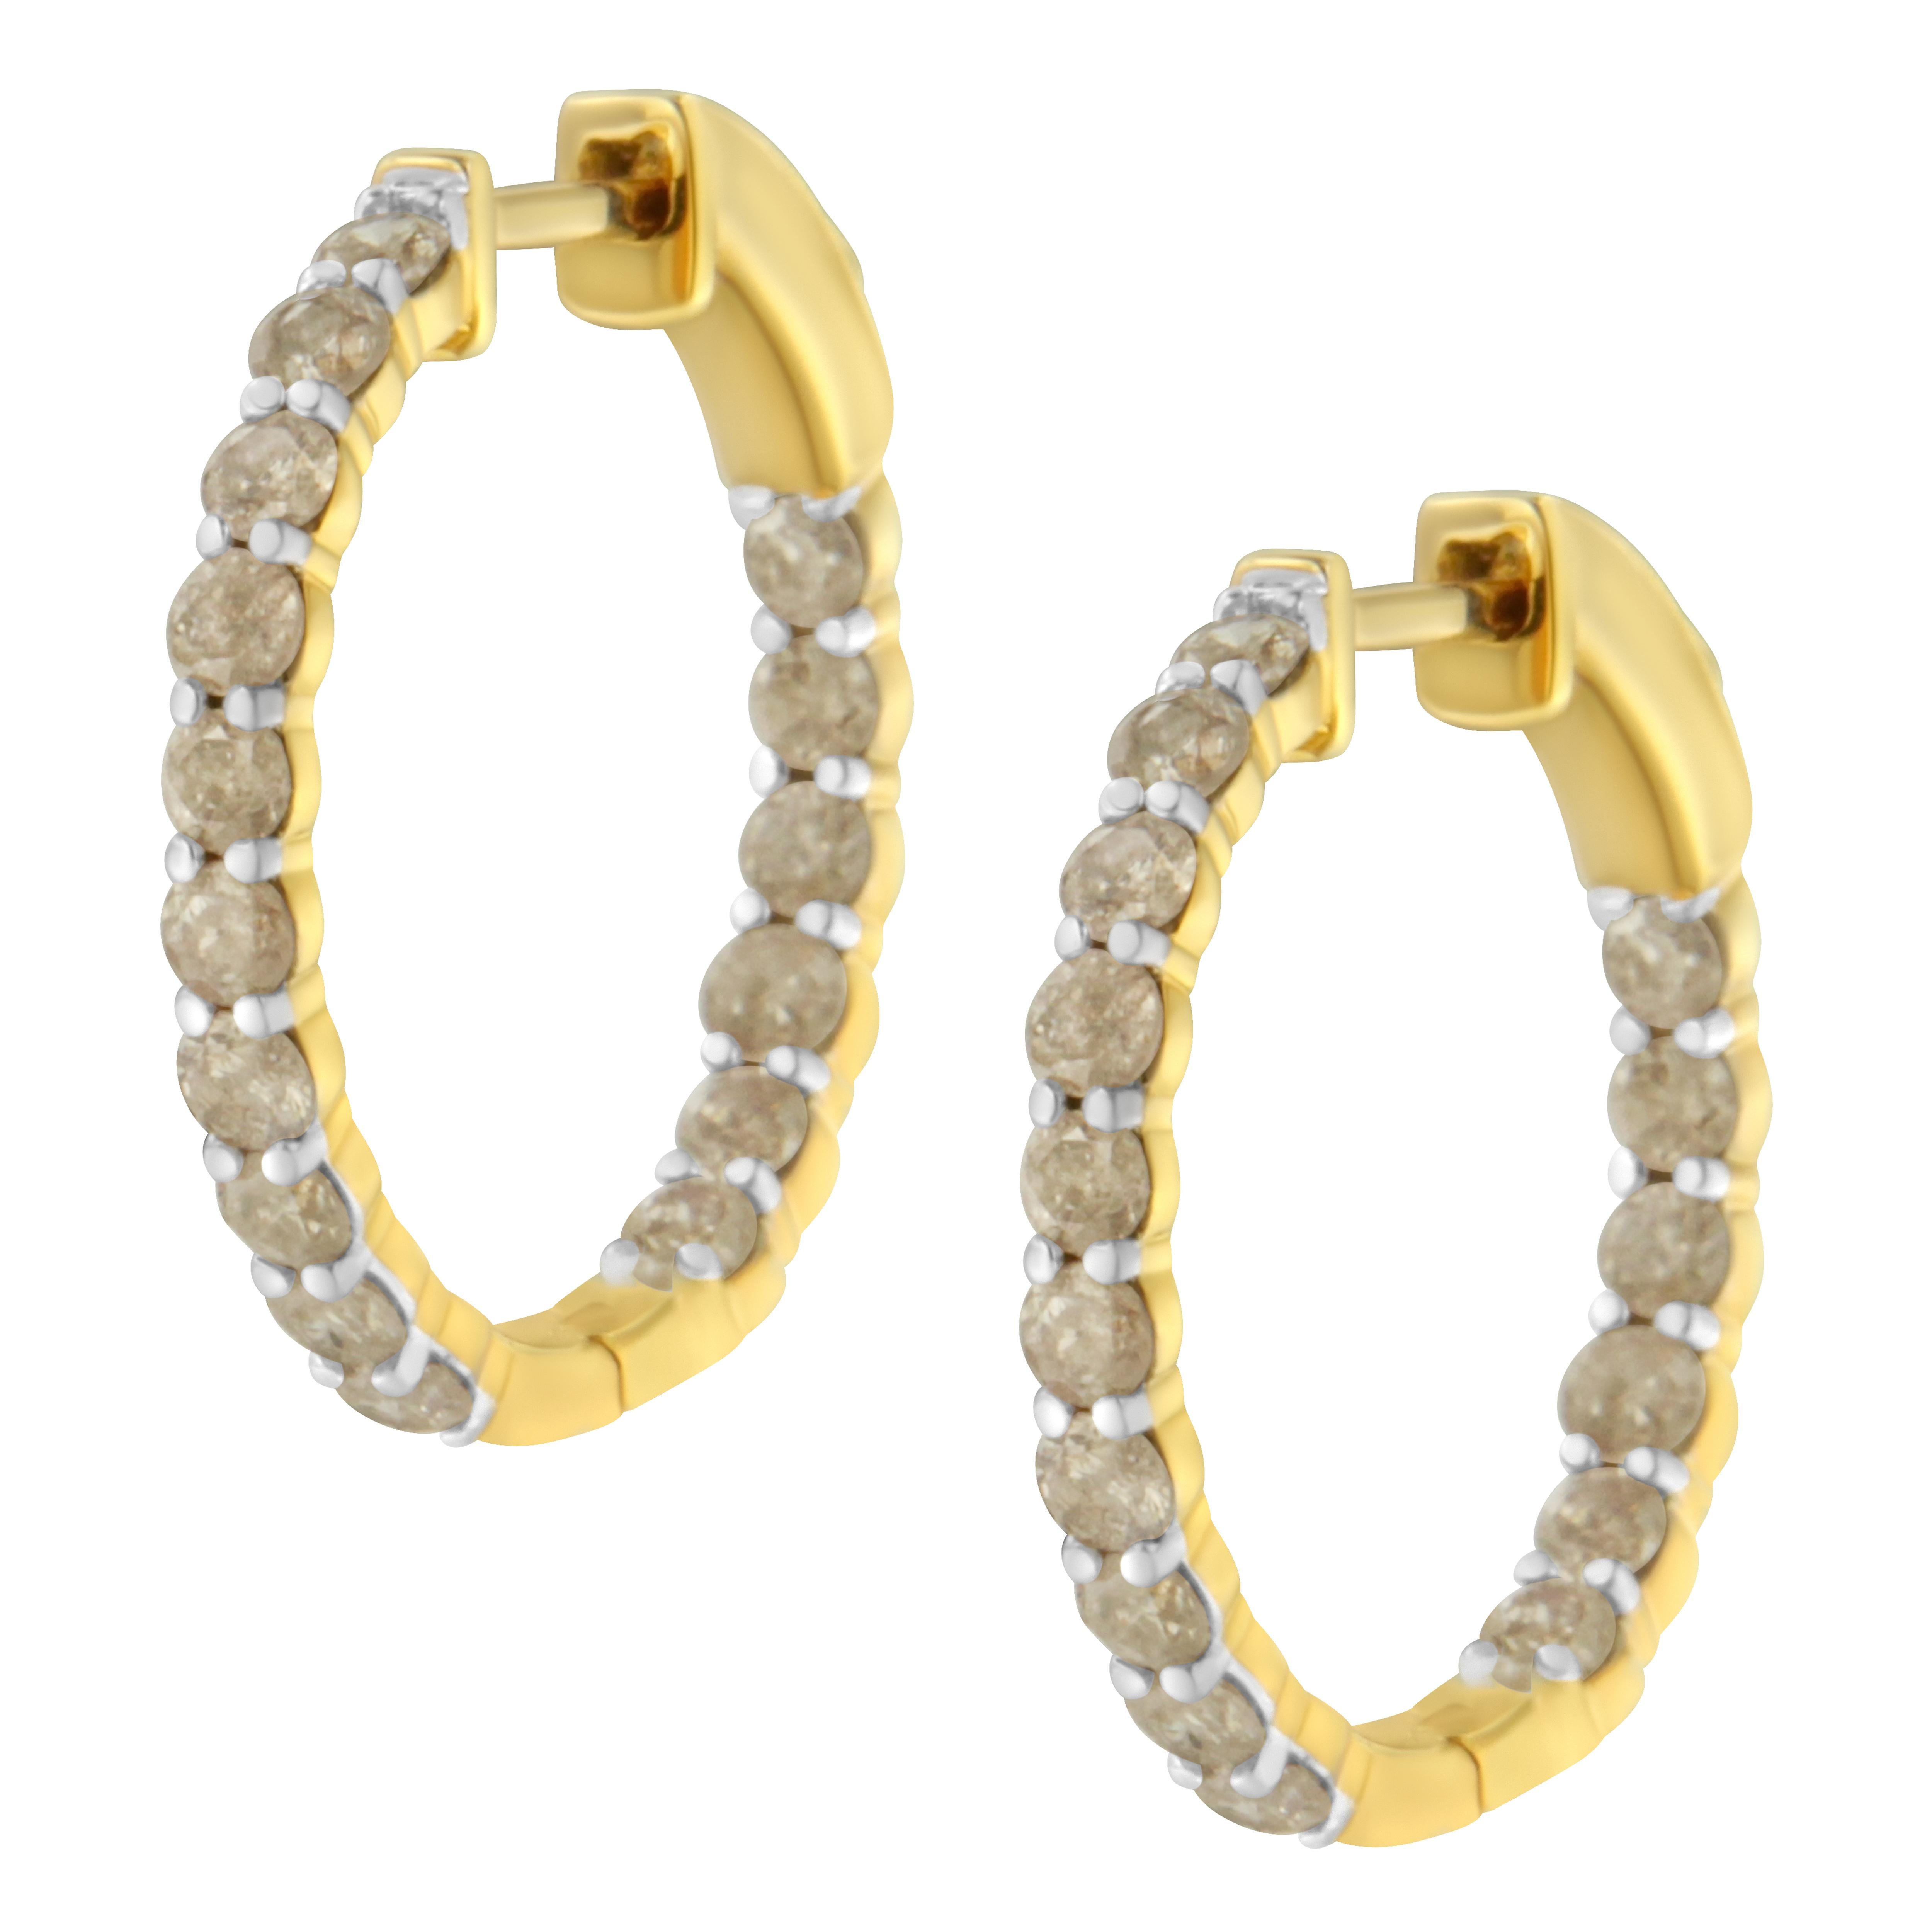 Round Cut 10K Yellow Gold Plated .925 Sterling Silver 2.0 Carat Diamond Hoop Earrings For Sale